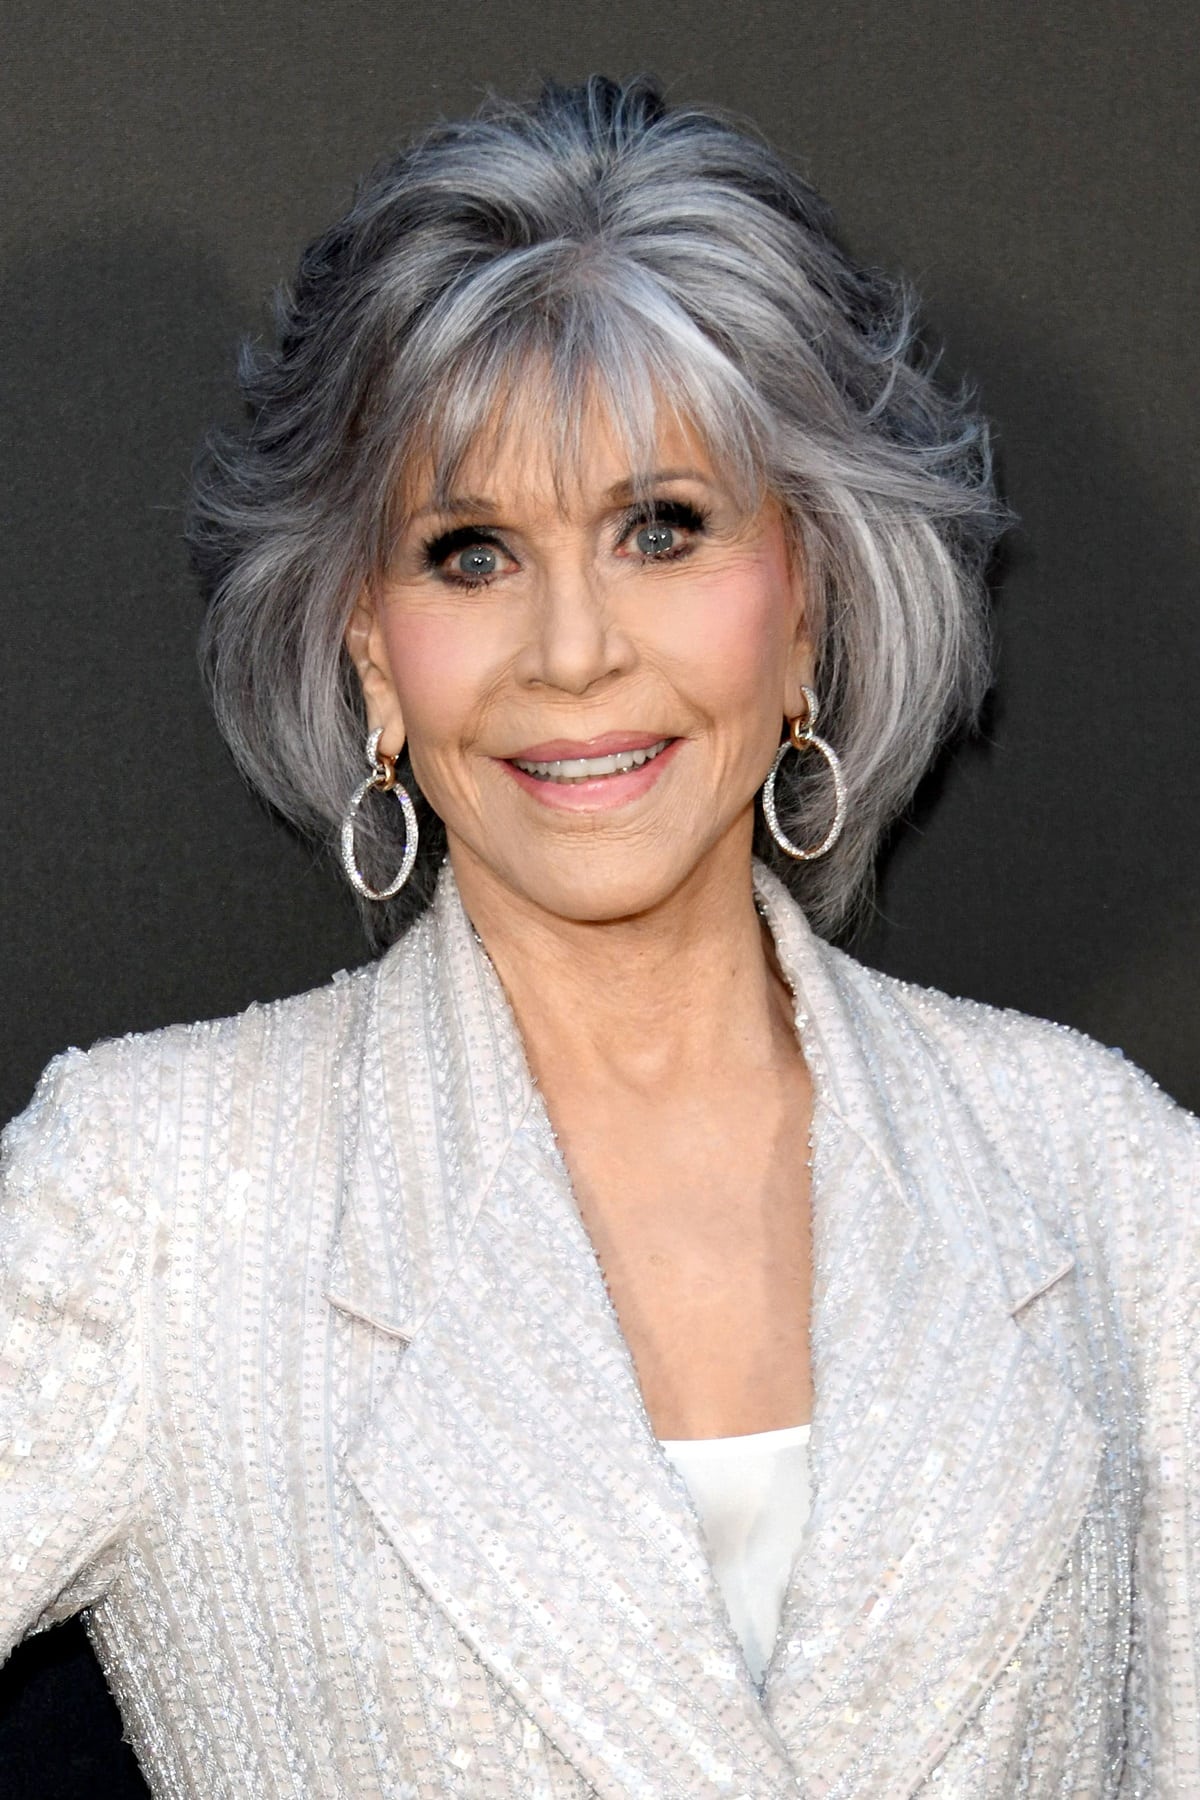 Jane Fonda adorned her ears with dangling diamond-encrusted earrings and styled her hair in an elegant, quaffed style